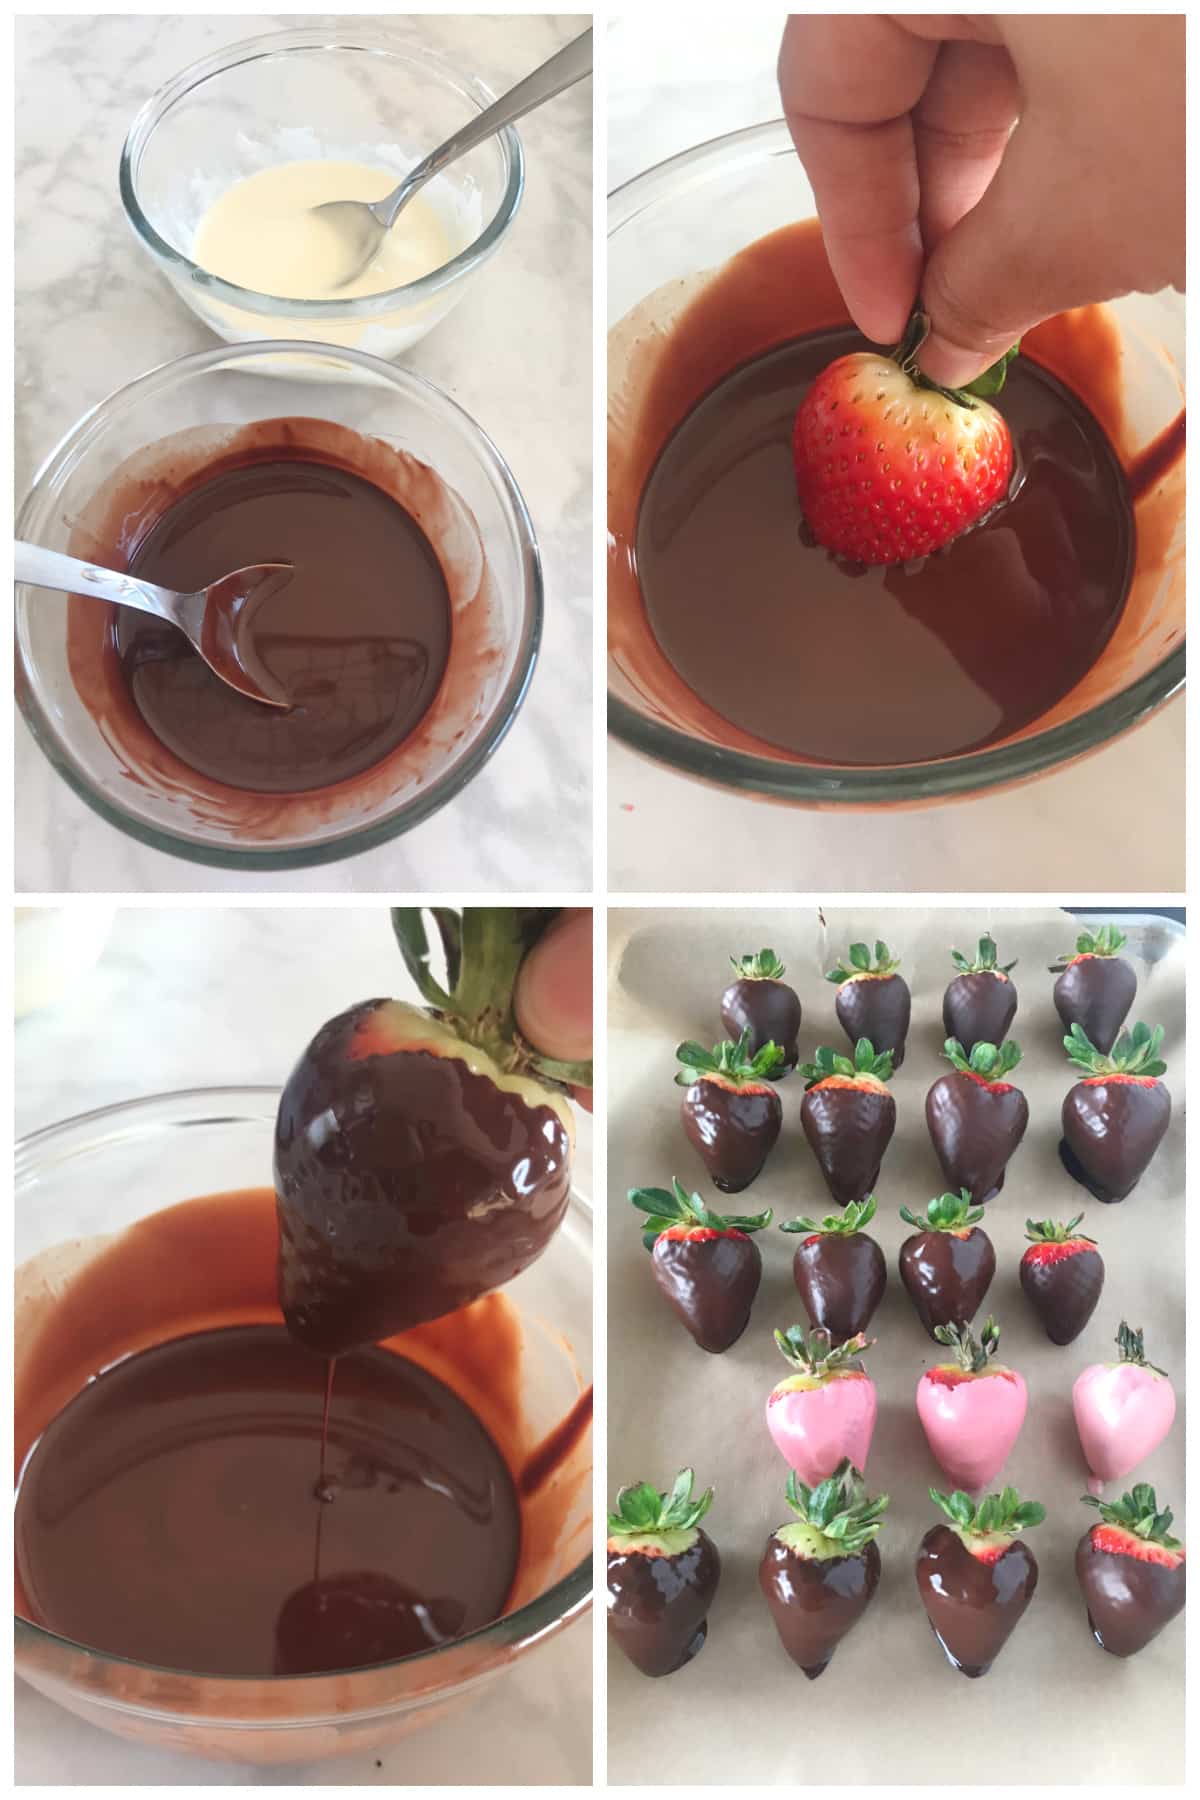 A collage of four images showing how to make chocolate covered strawberries.